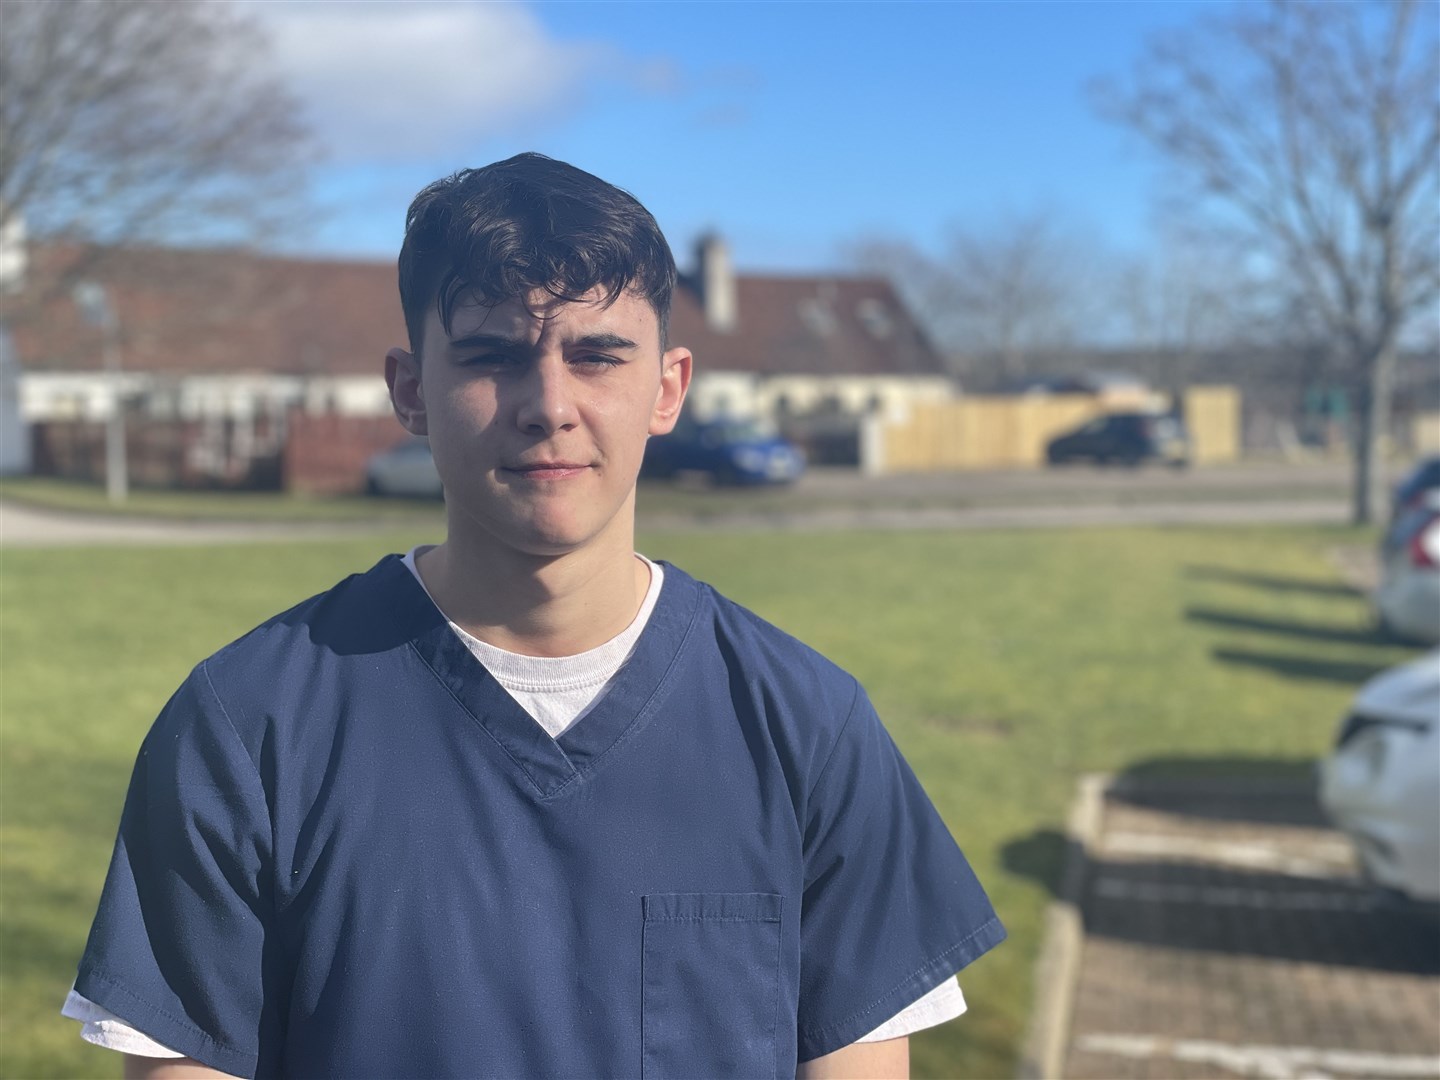 Connor McMinn: 'My SVQ 3 has helped me improve my skills, which means I am better able to support the residents we care for at Urray House.'